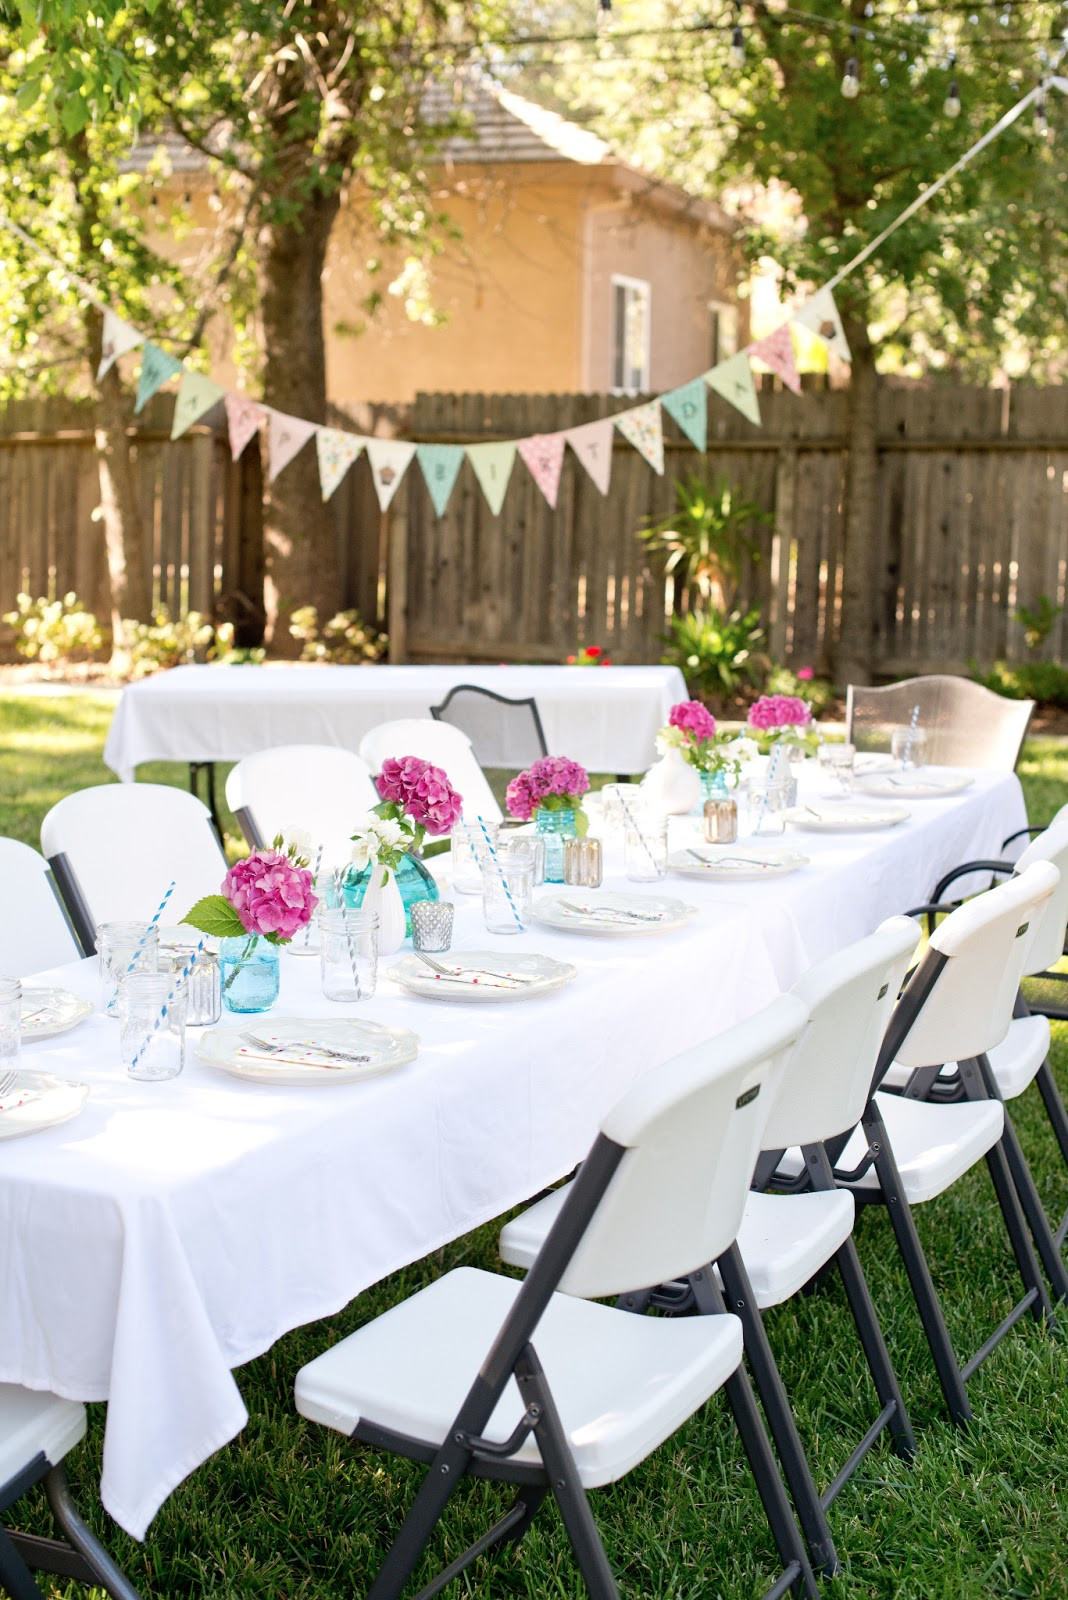 Backyard Party Ideas Decorating
 Backyard Party Decorations For Unfor table Moments